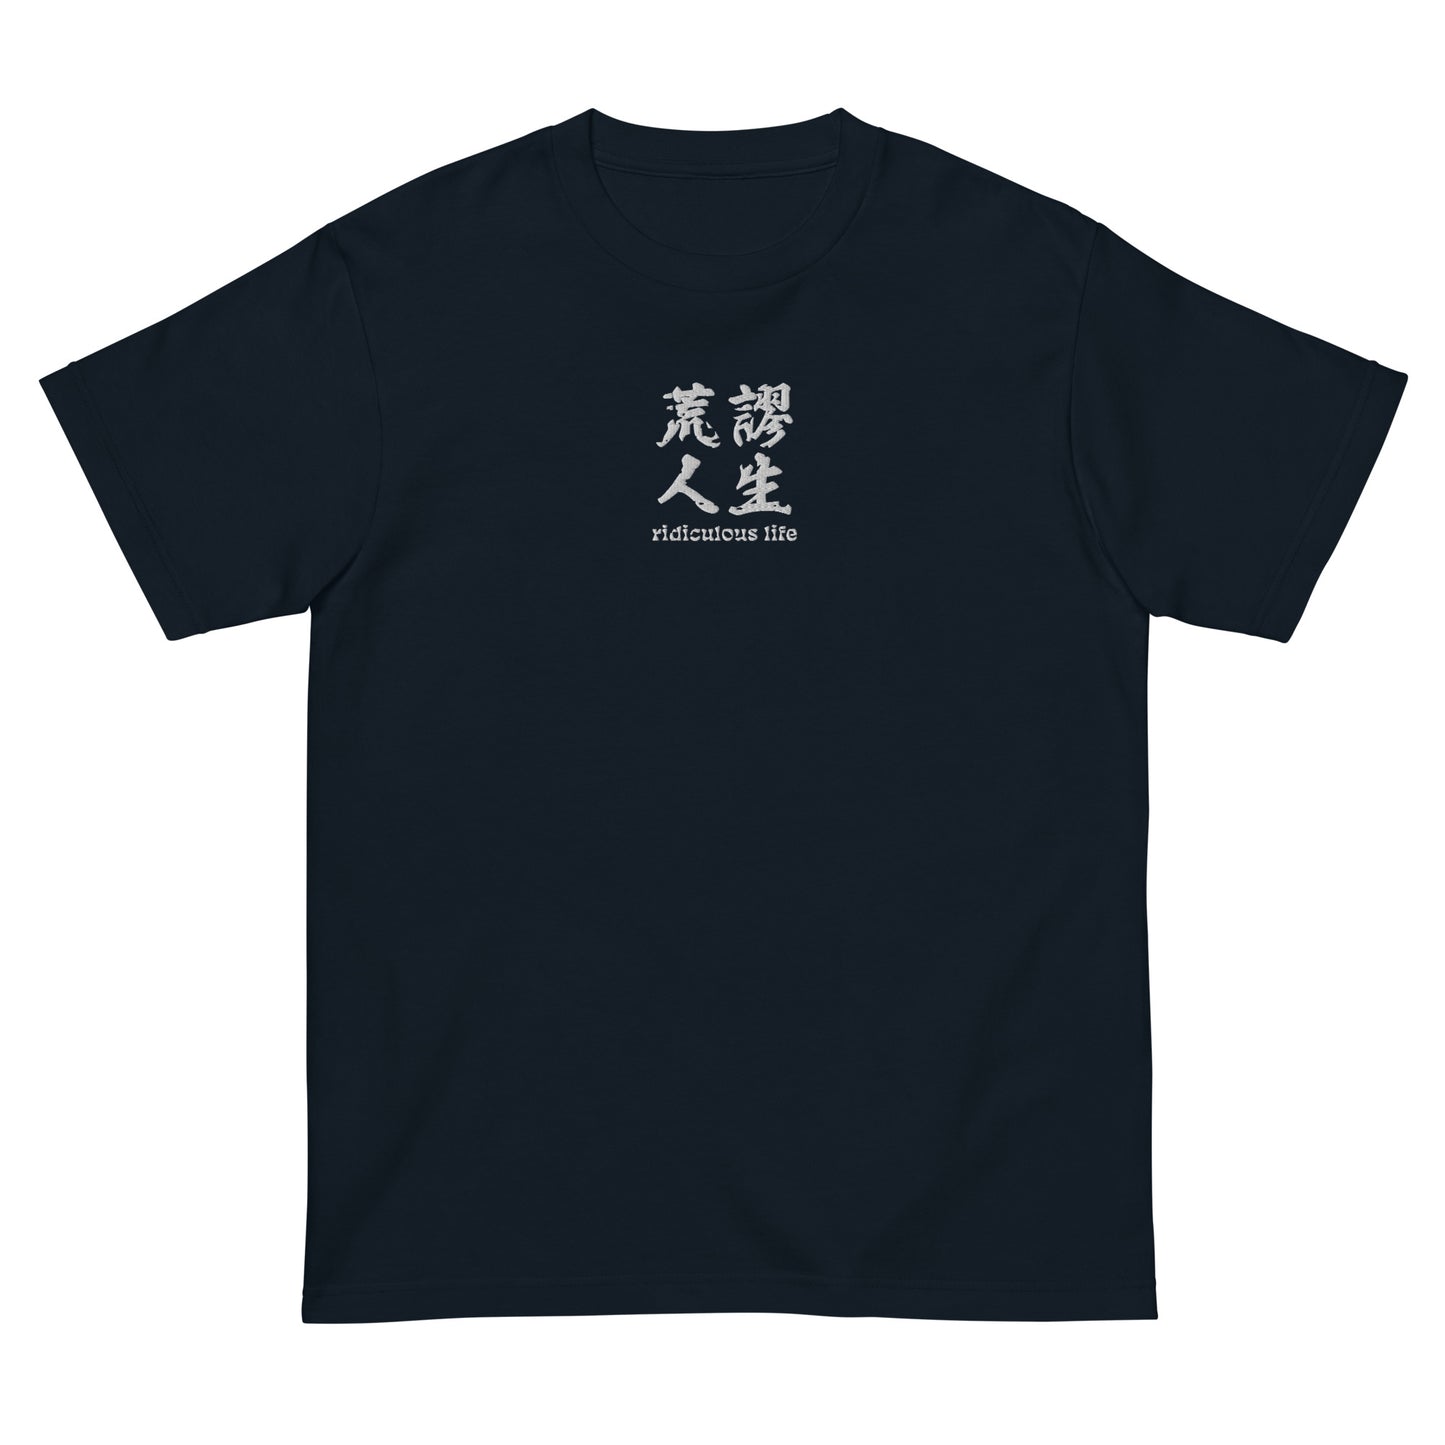 Navy High Quality Tee - Front Design with an Black Embroidery "Ridiculous Life" in Chinese and English